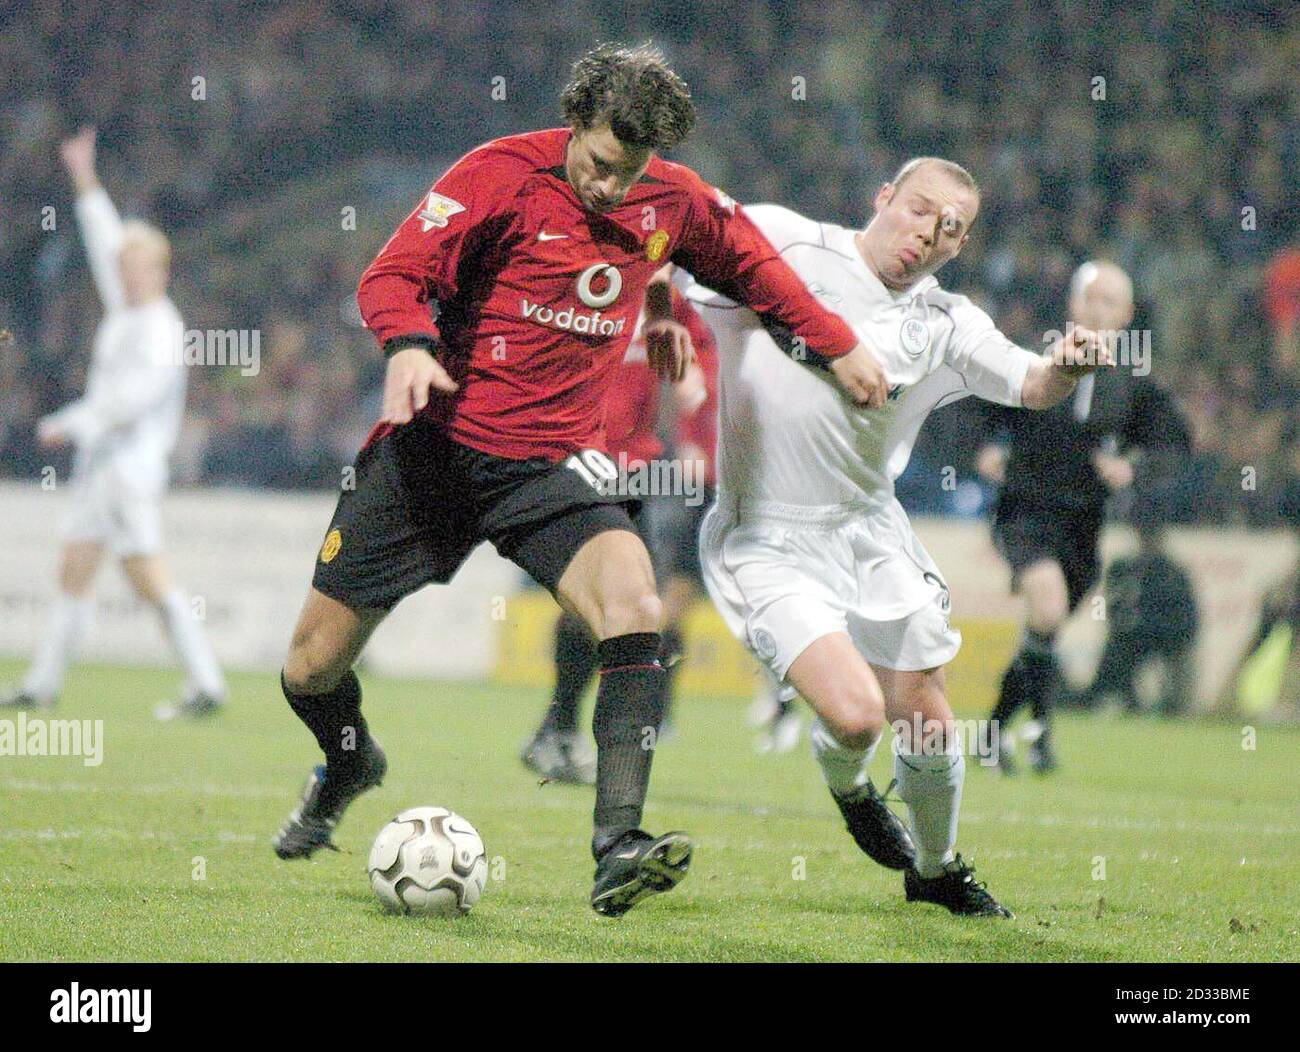 Ruud Van Nistelrooy of Manchester United (left) holds off Simon Charlton of Bolton, during their Barclaycard Premiership match at The Reebok Stadium, Bolton.   THIS PICTURE CAN ONLY BE USED WITHIN THE CONTEXT OF AN EDITORIAL FEATURE. NO WEBSITE/INTERNET USE UNLESS SITE IS REGISTERED WITH FOOTBALL ASSOCIATION PREMIER LEAGUE. Stock Photo